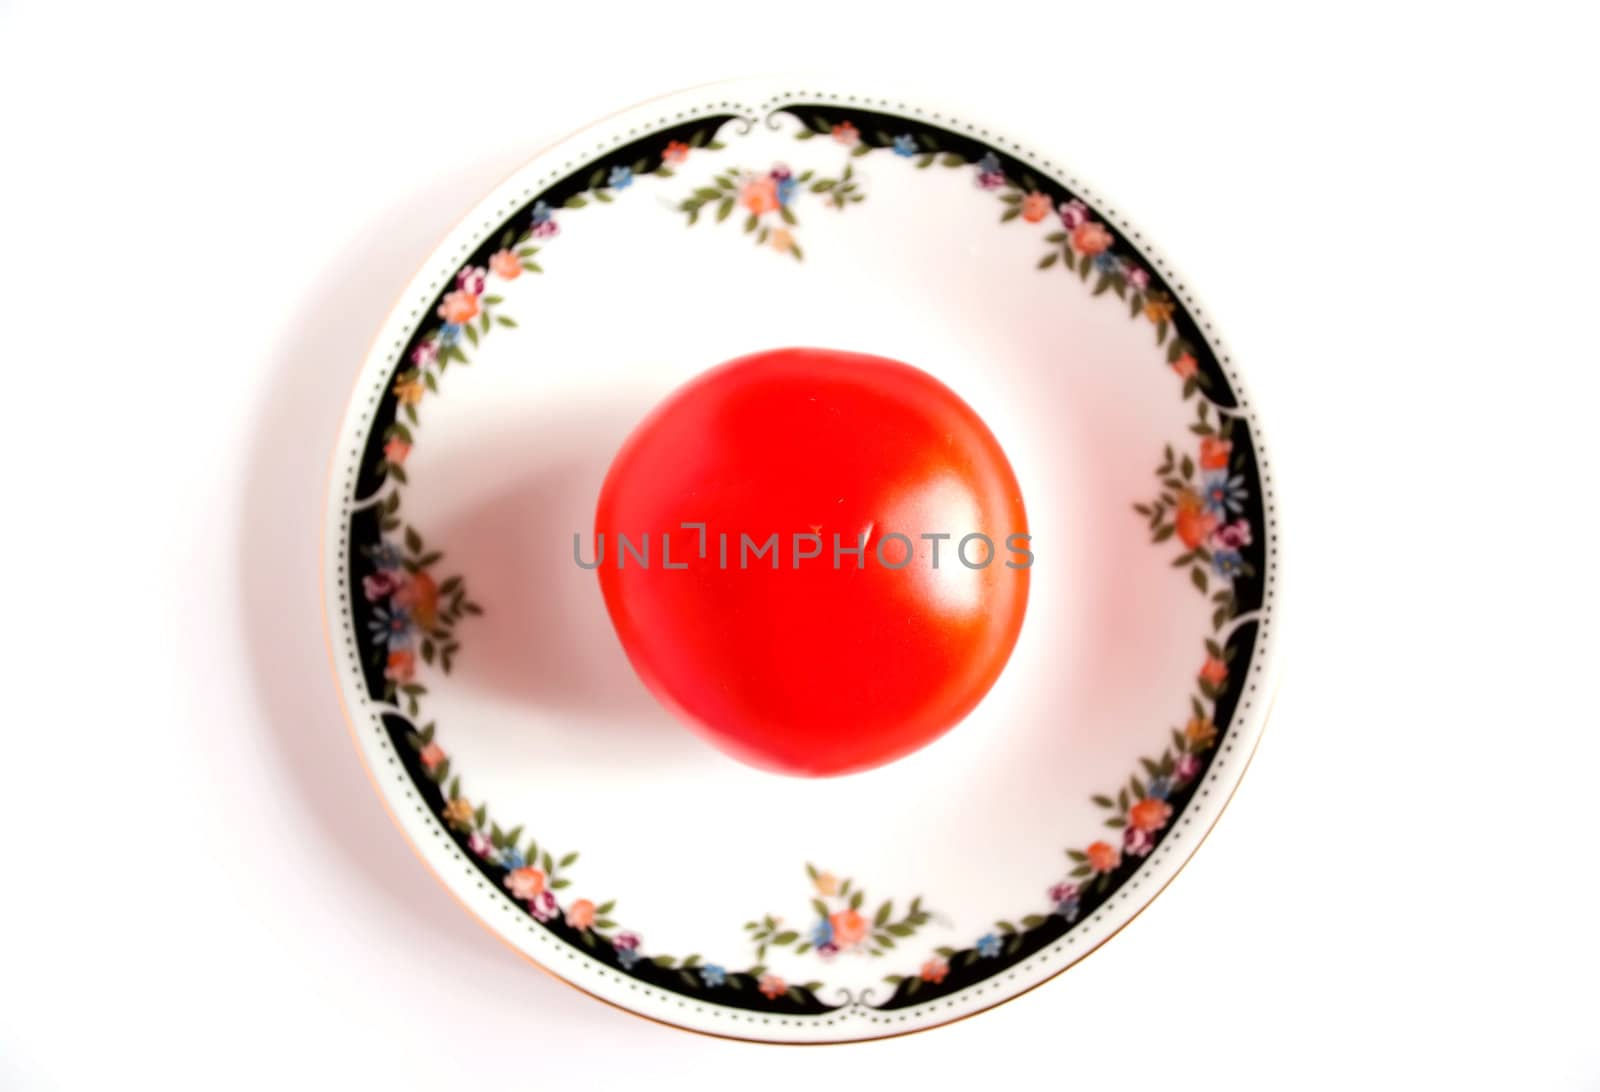 White saucer with a red tomato. by Diversphoto